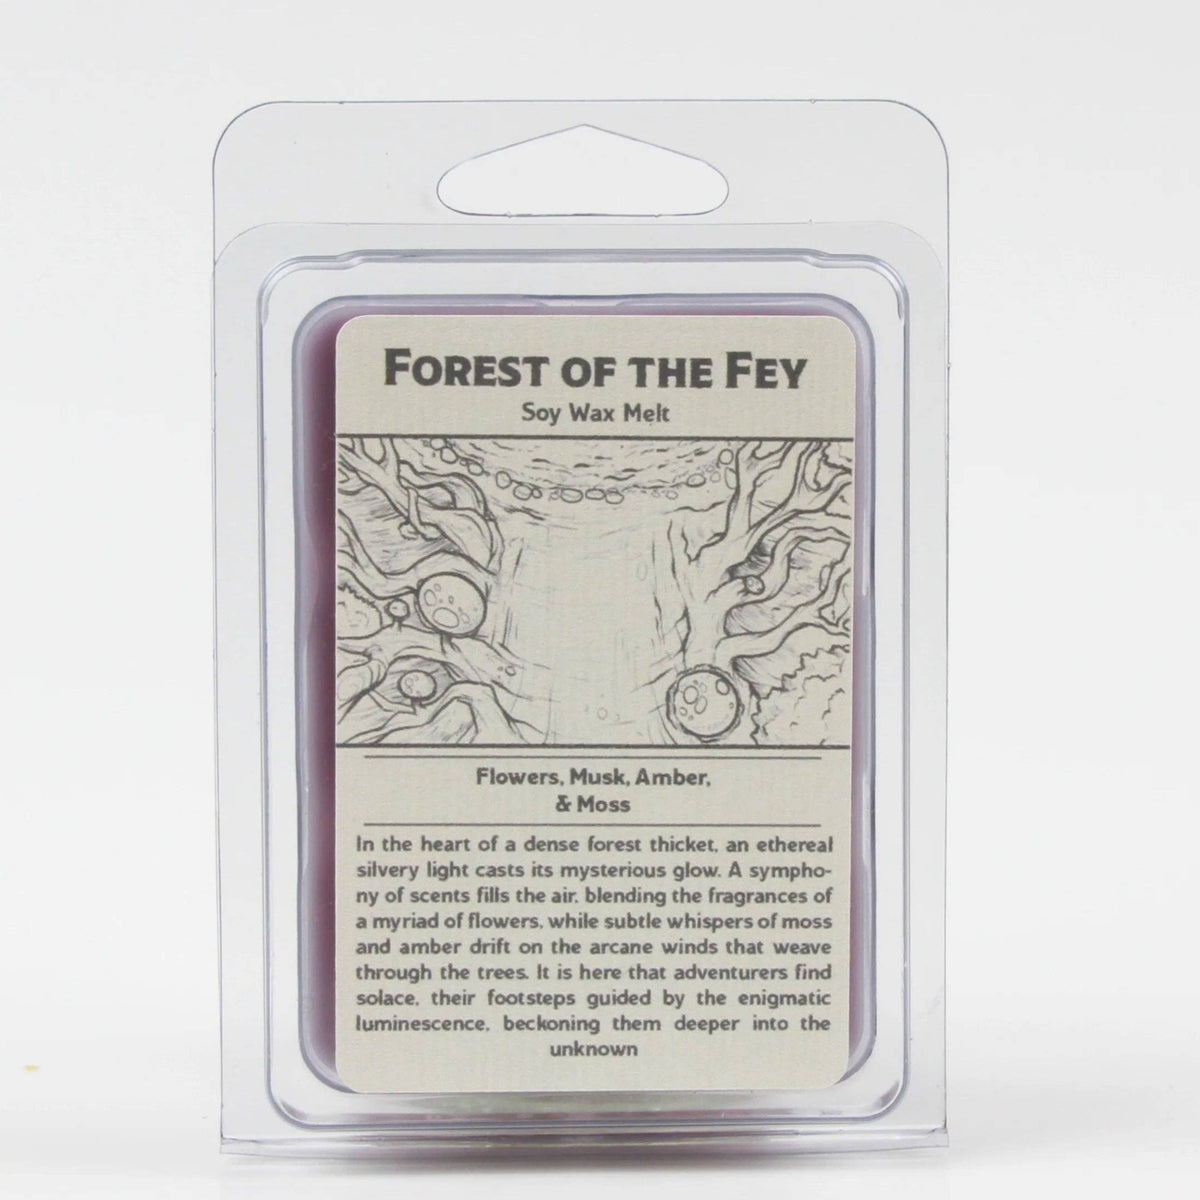 Forest of the Fey - Wax Melt Scent Notes: Flowers, Musk, Amber, &amp; Moss